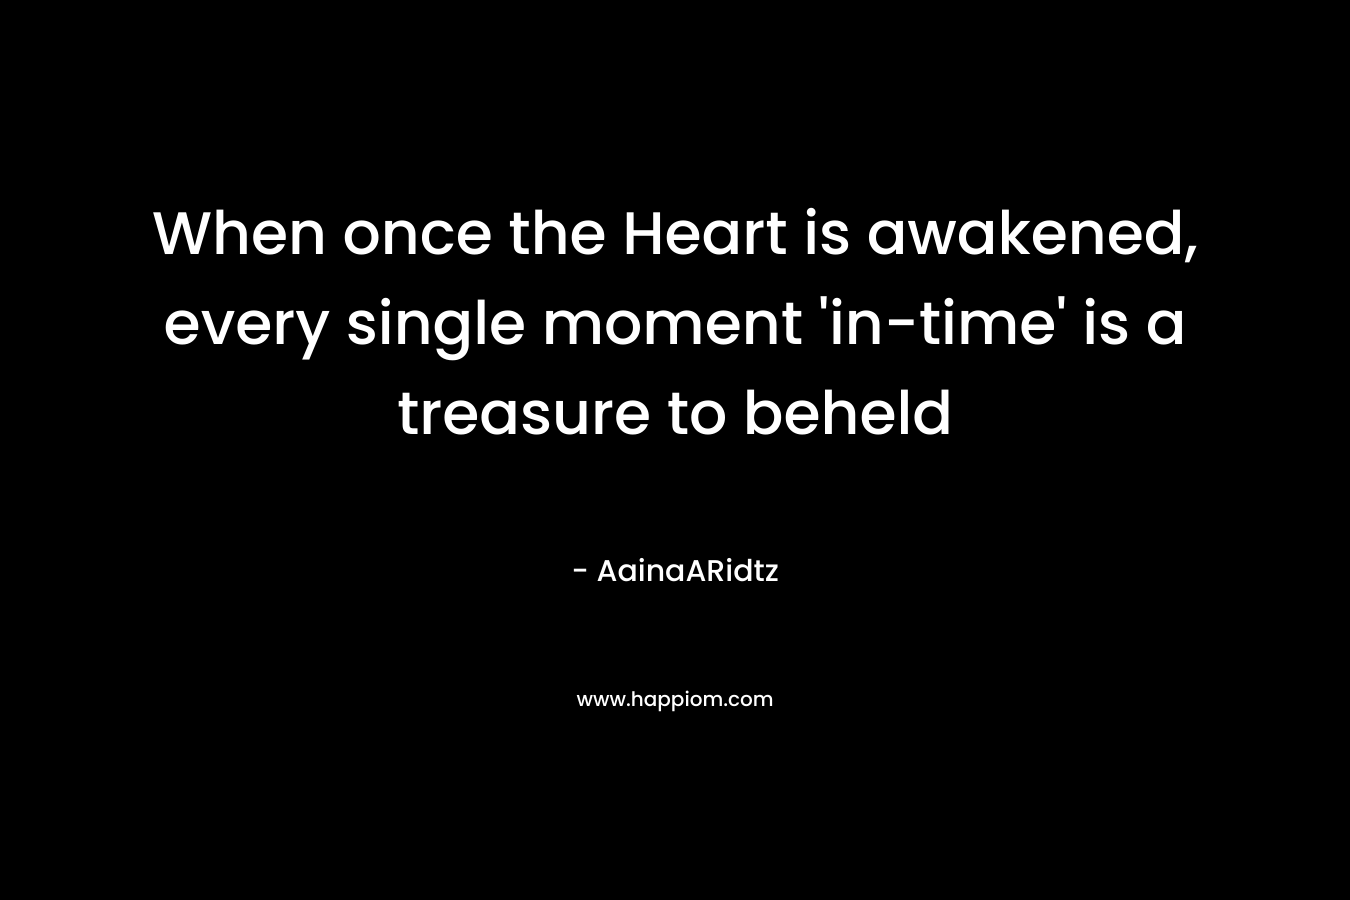 When once the Heart is awakened, every single moment ‘in-time’ is a treasure to beheld – AainaARidtz